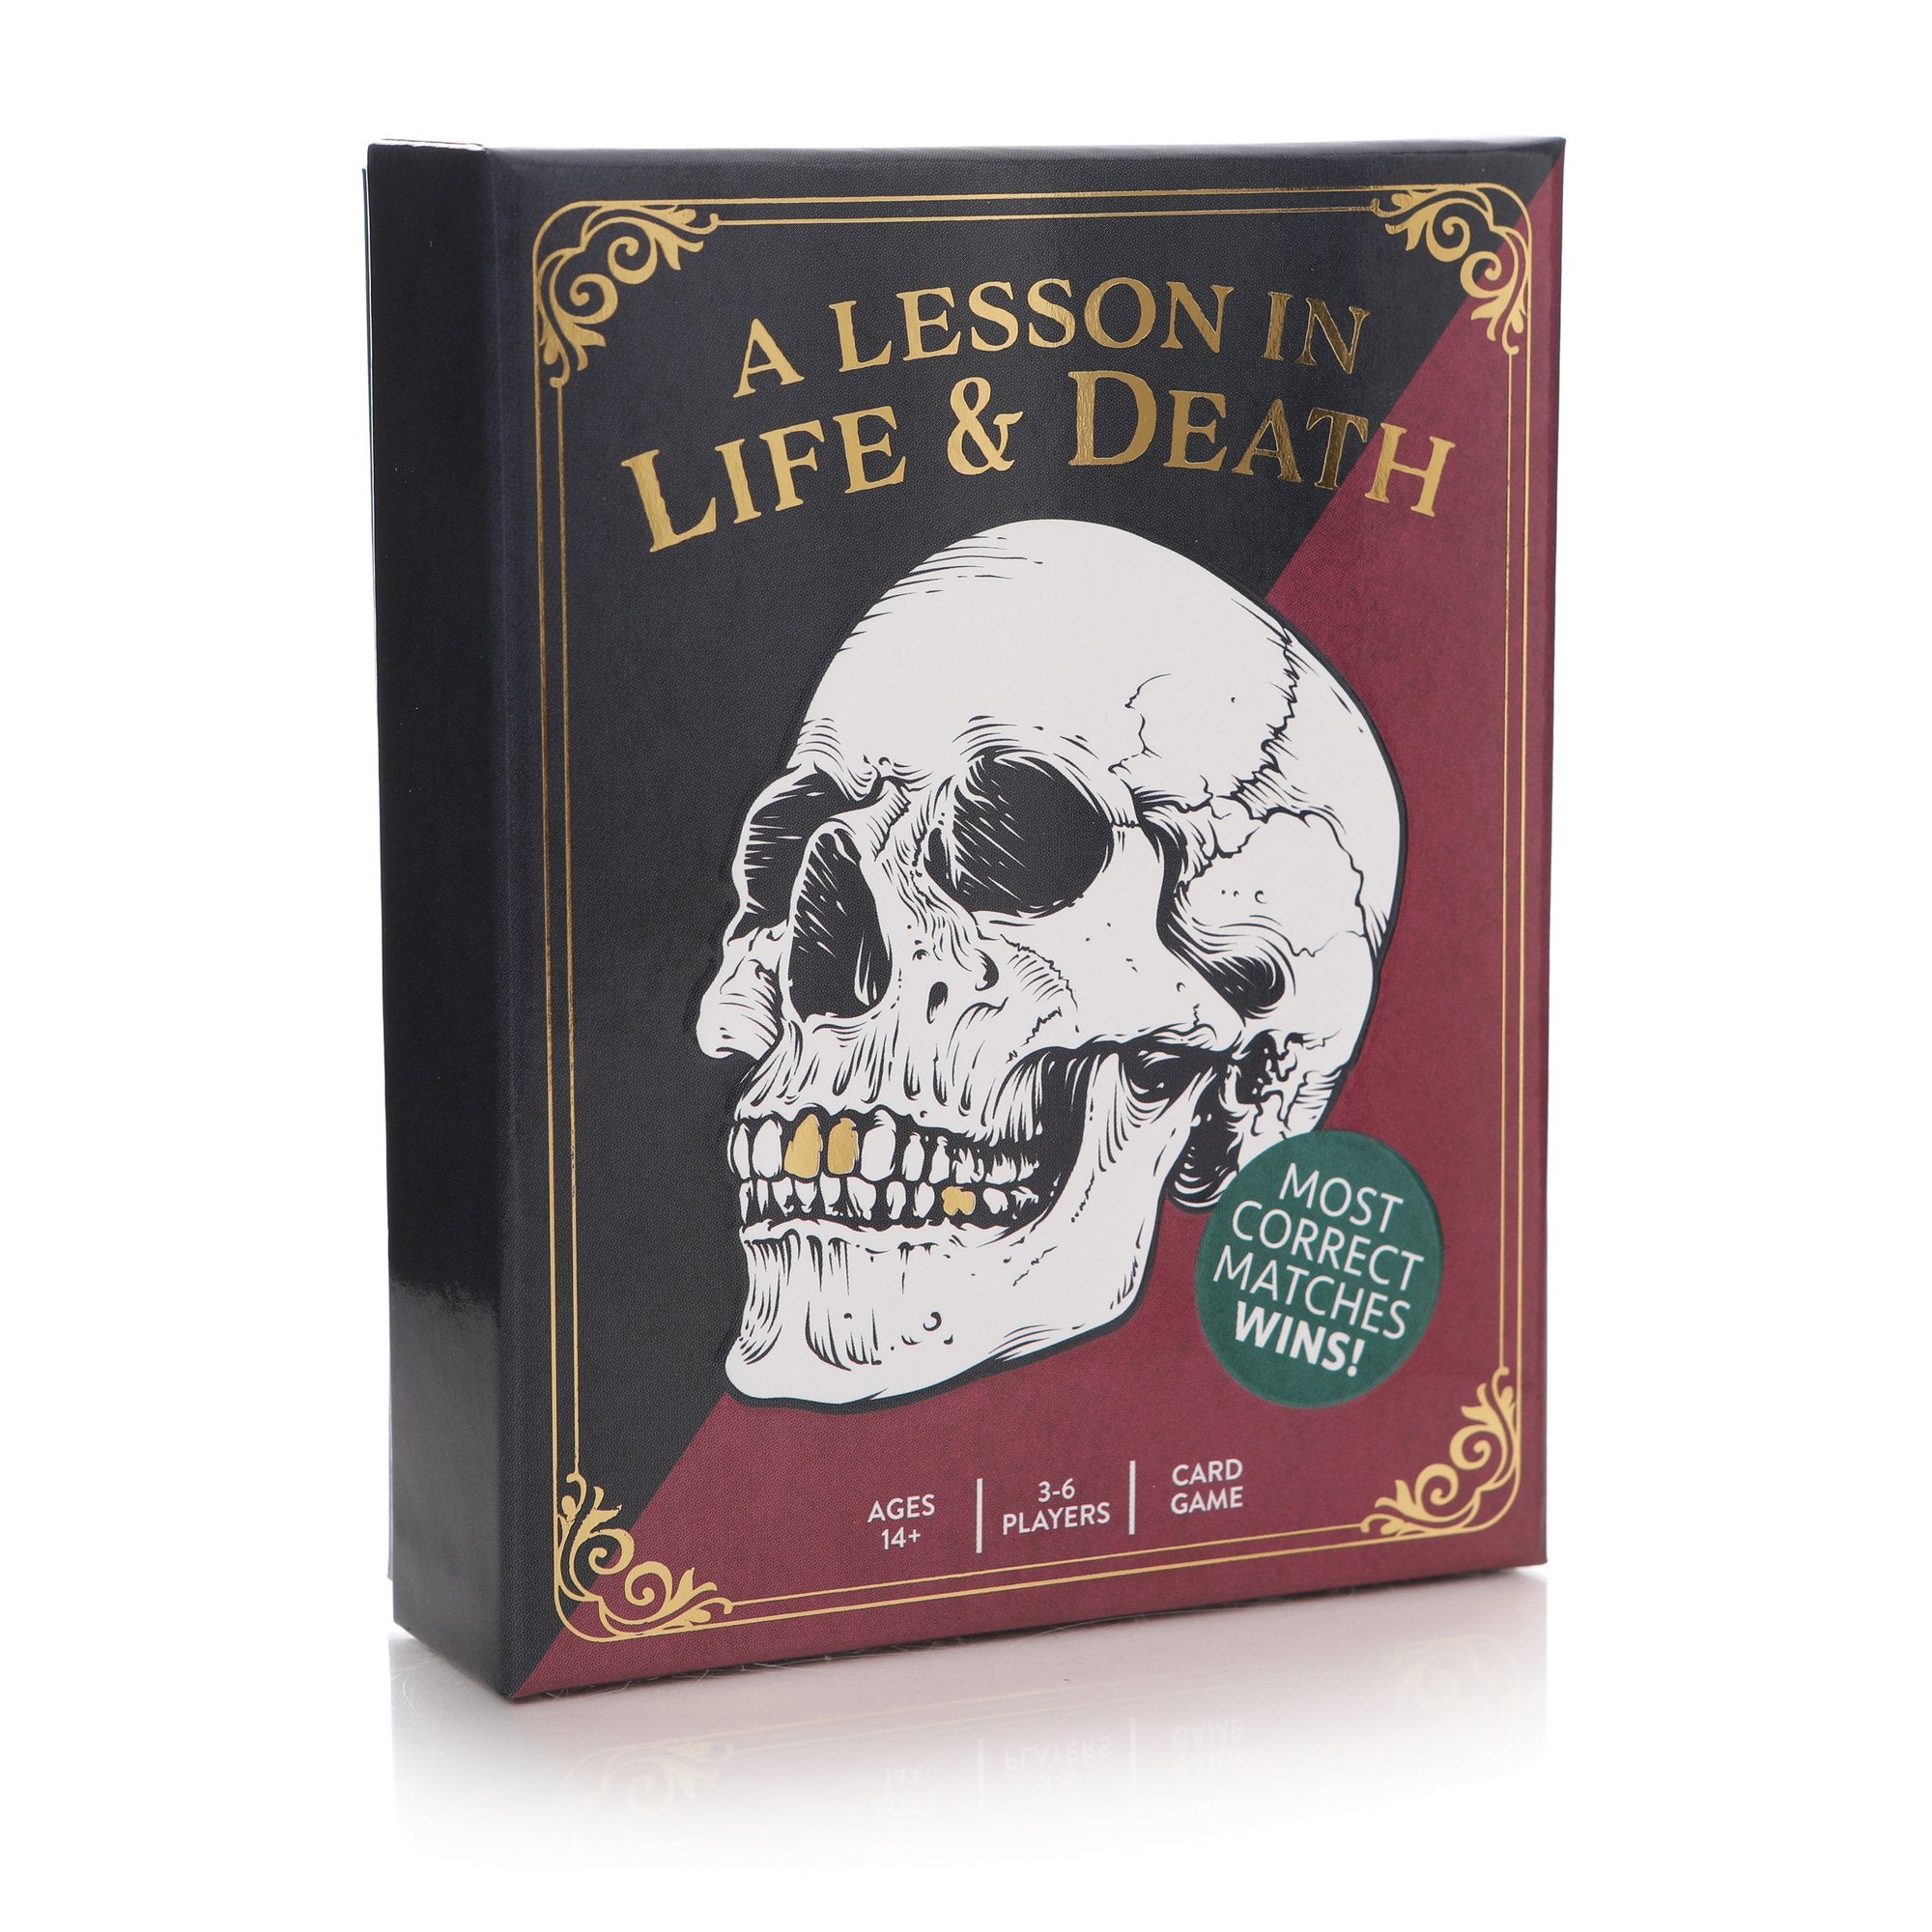 A Lesson In Life & Death Card Game